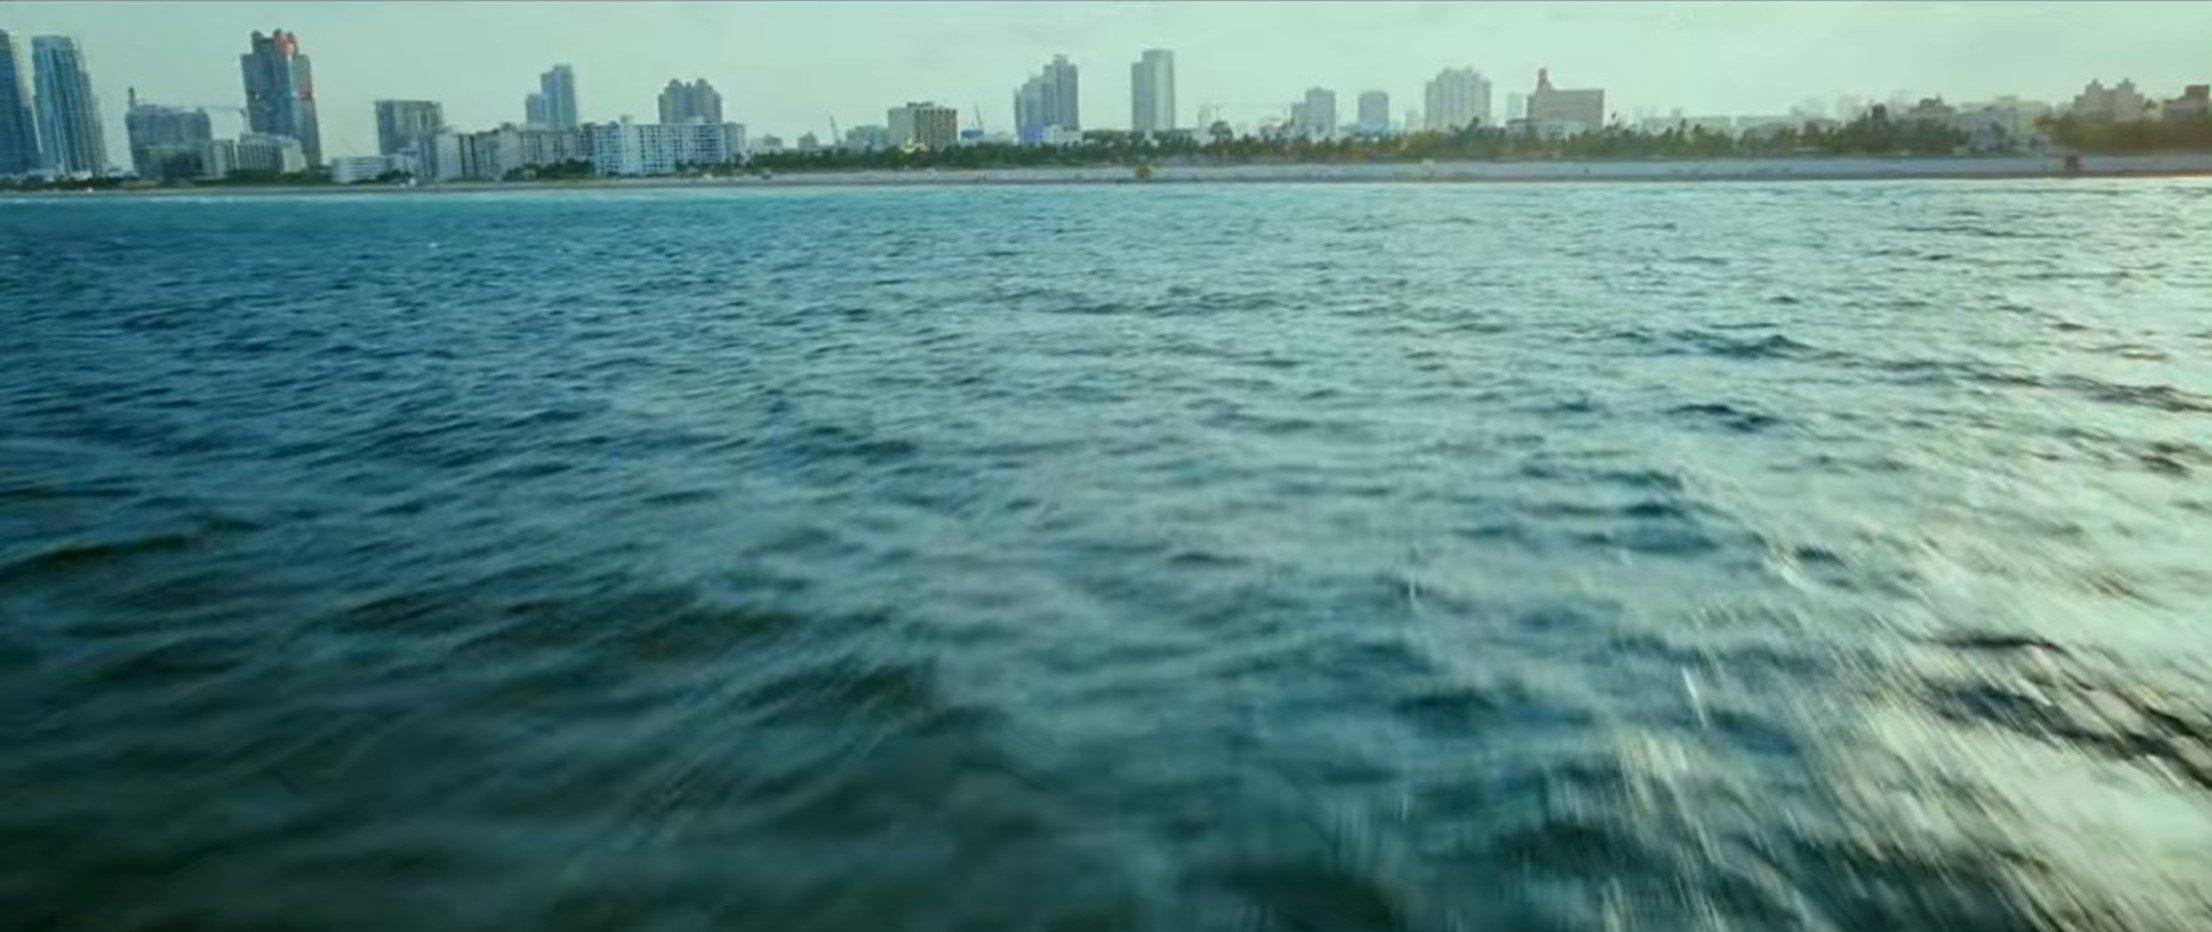 #10: Can you guess the movie from this opening scene?